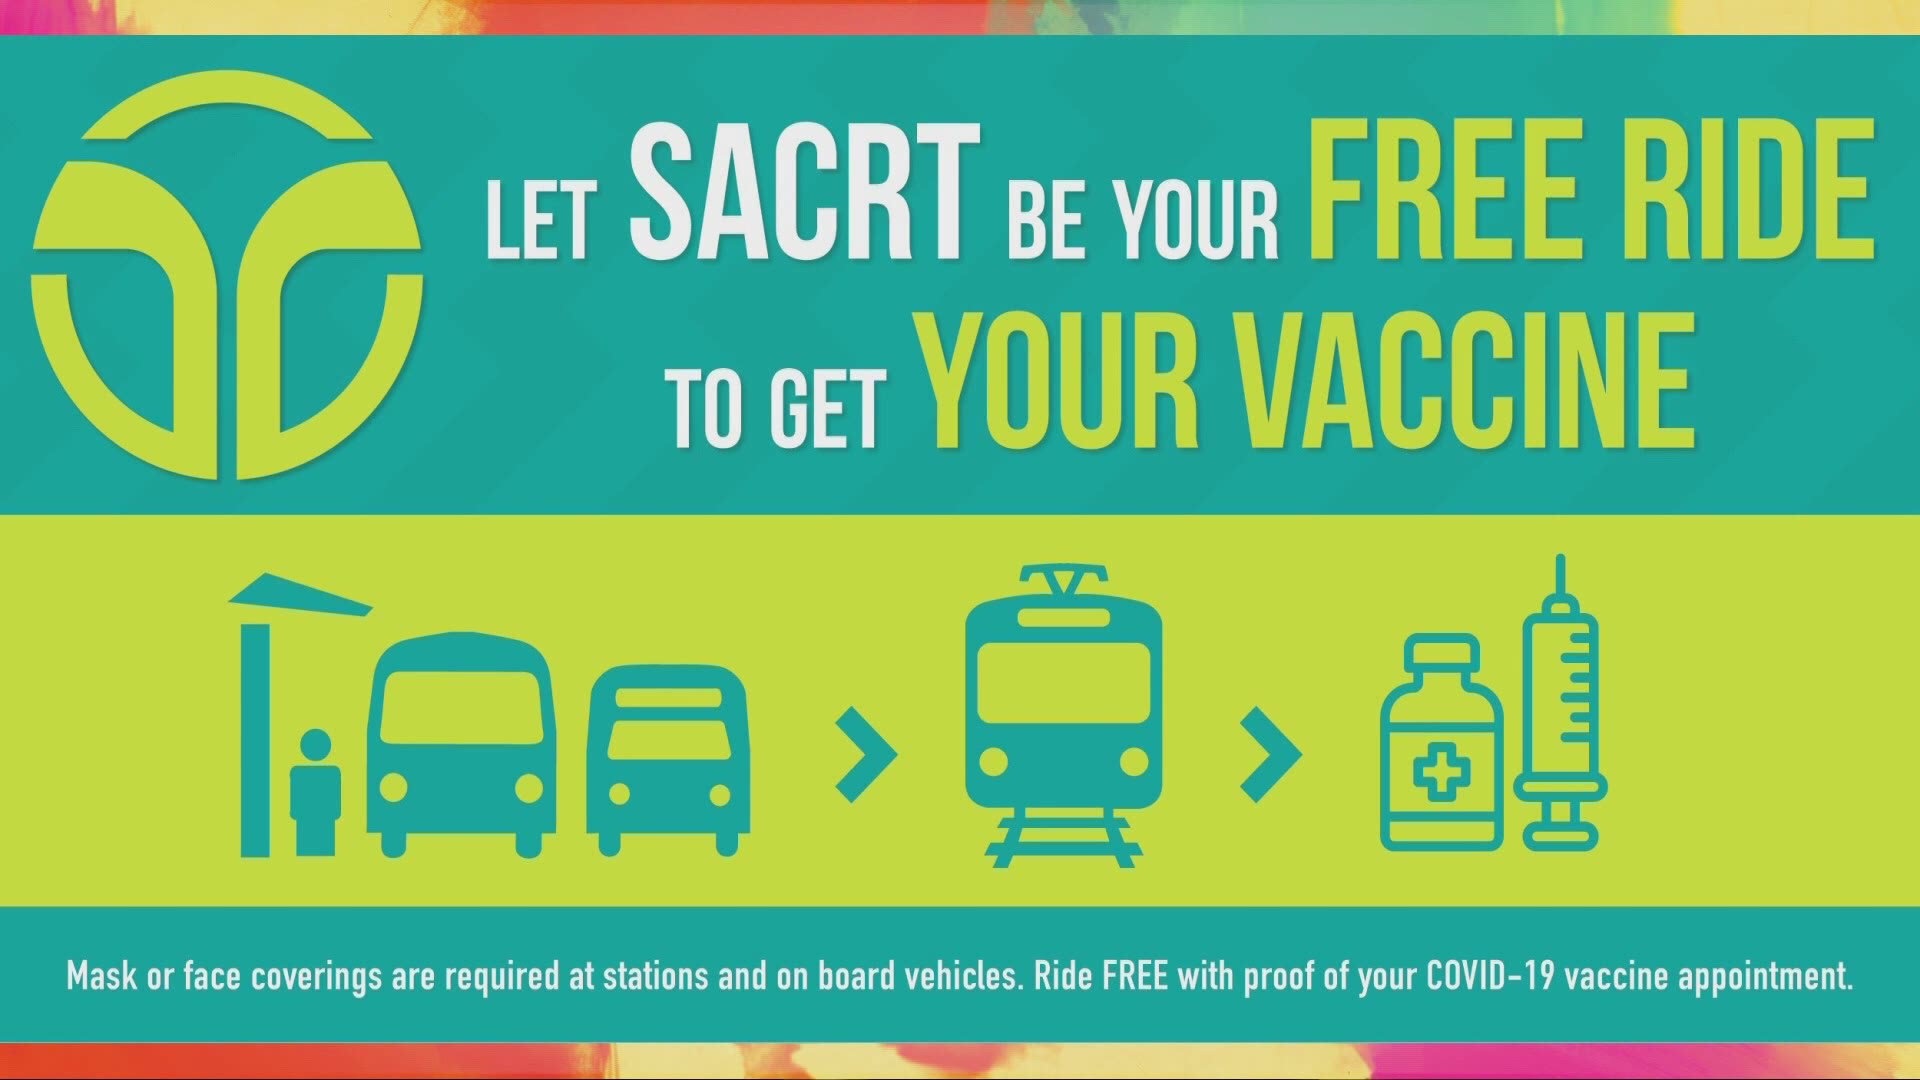 SacRT is offering free rides for anyone getting a covid-19 vaccine. This segment was paid for by SacRT.